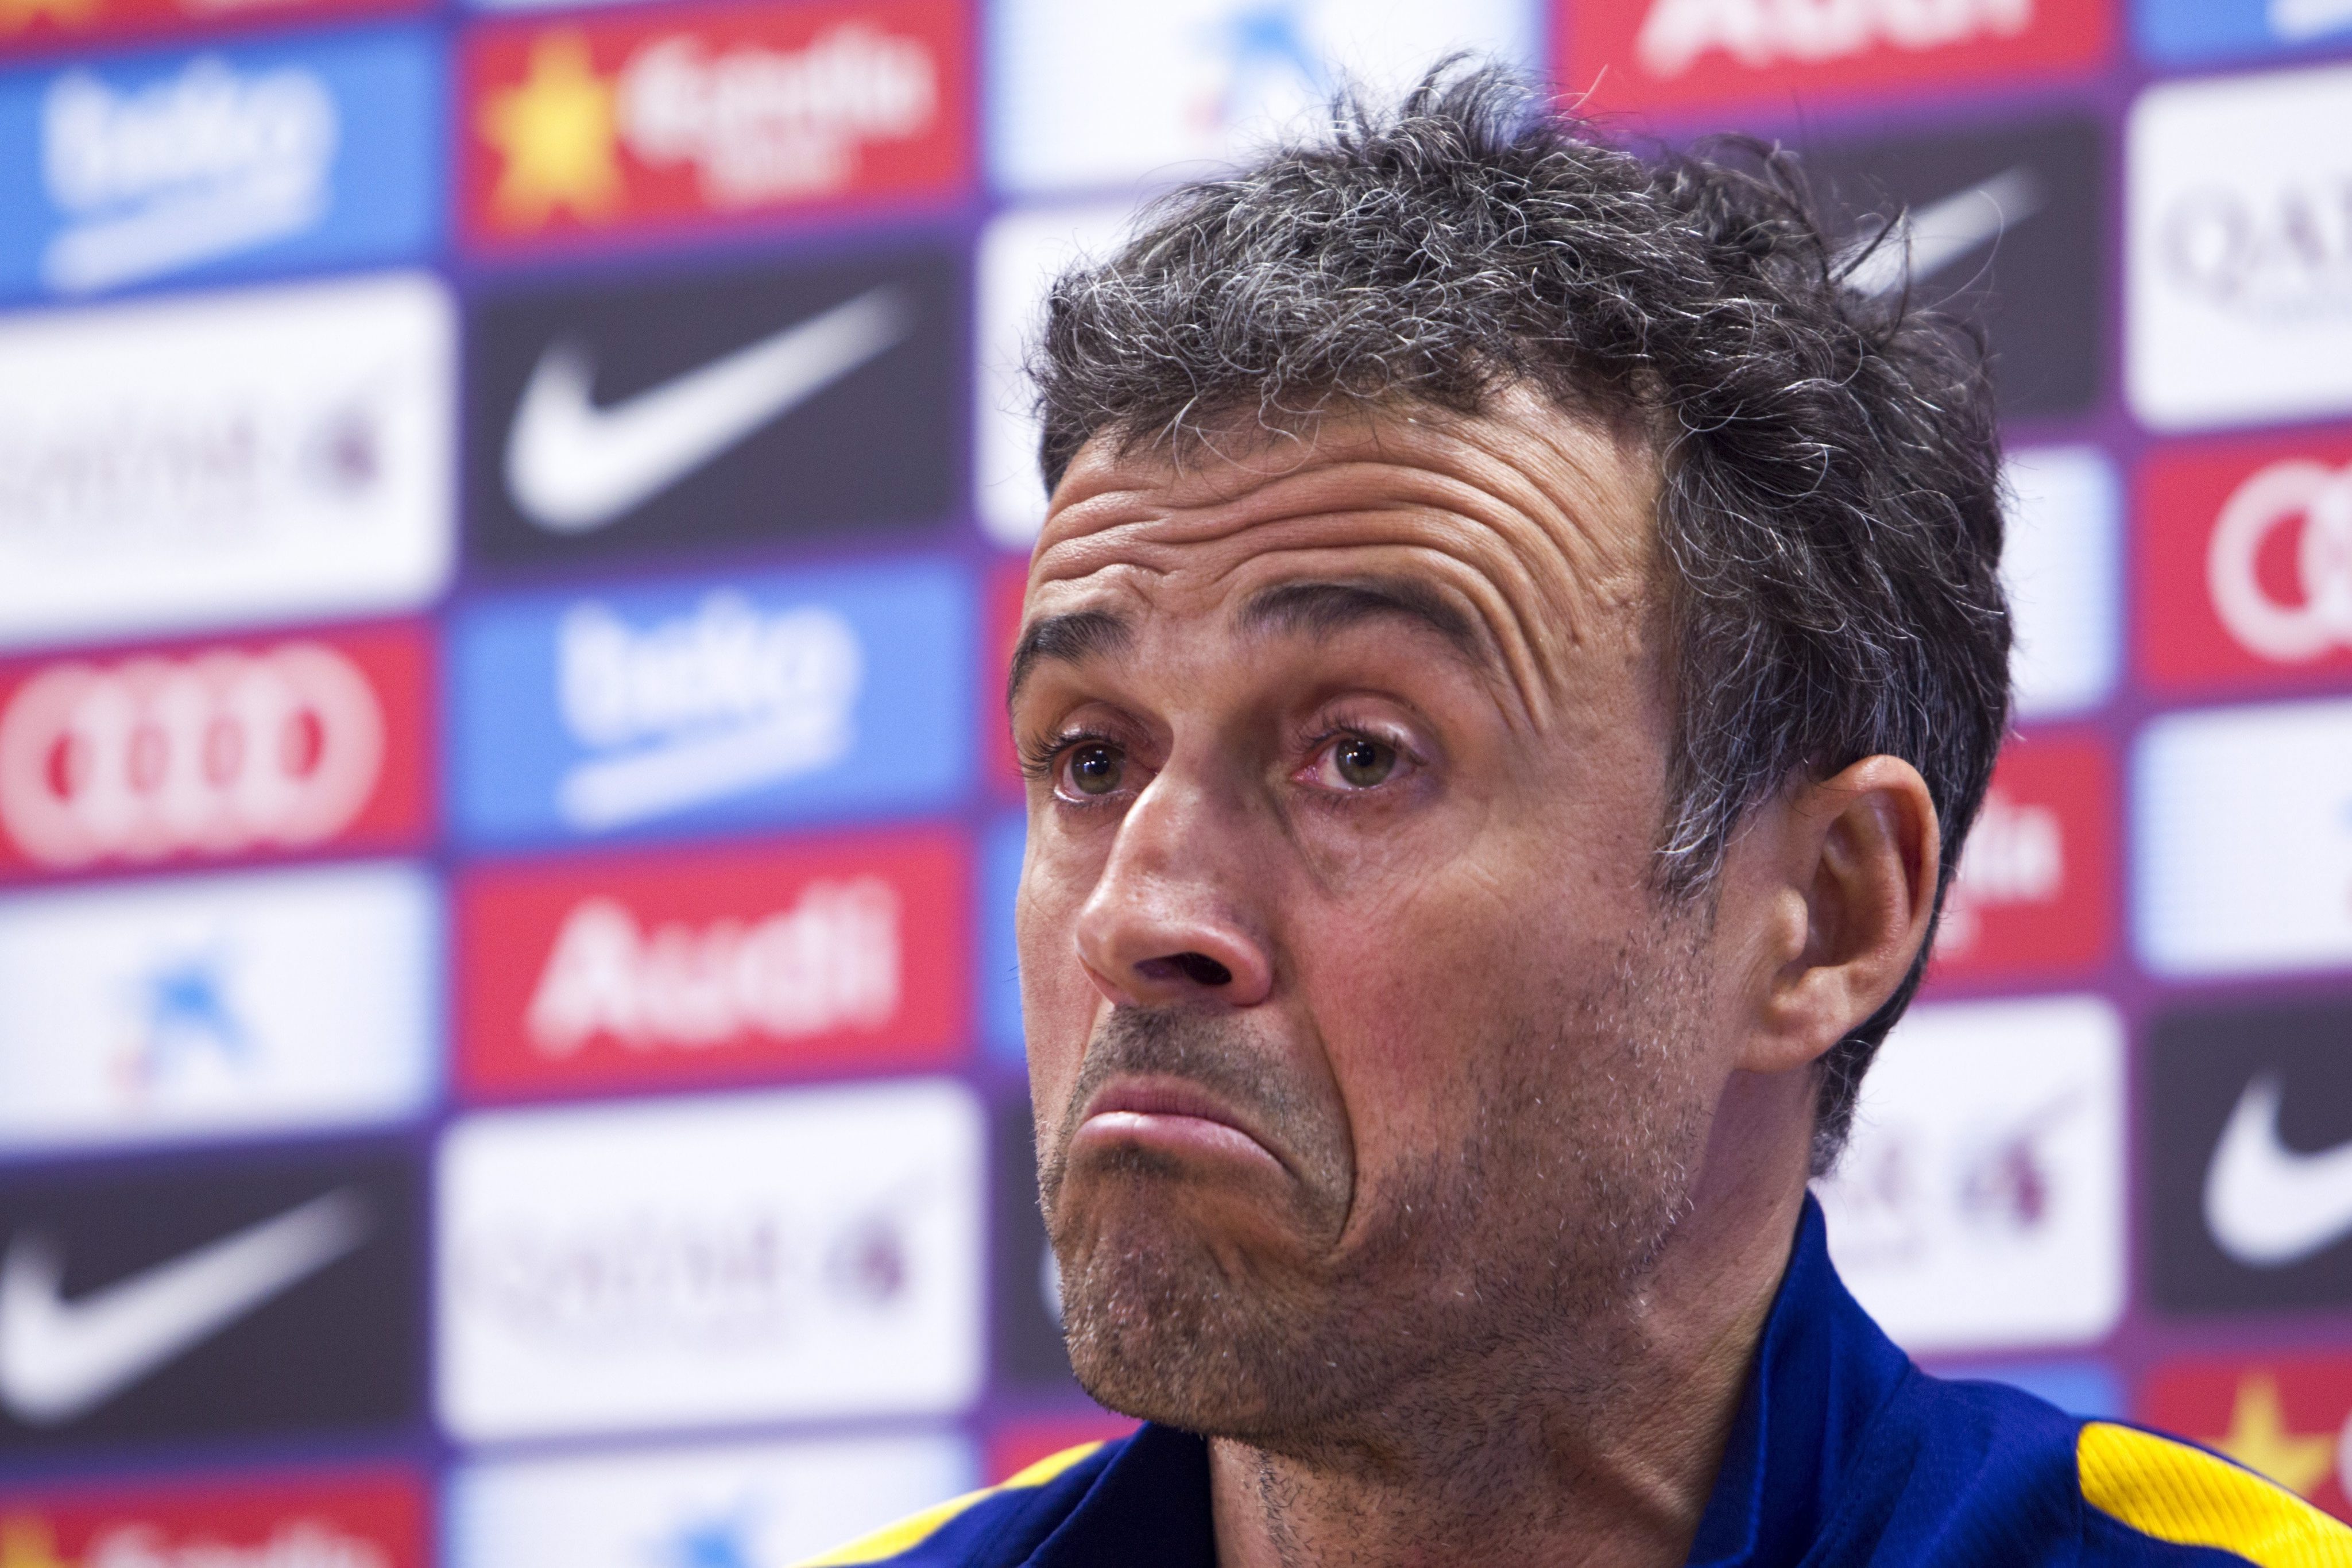 epa05190472 Head coach of FC Barcelona, Luis Enrique, gestures during a press conference at the team's Sant Joan Despi sports complex, outside Barcelona, northeastern Spain, 02 March 2016. FC Barcelona will face Rayo Vallecano in a Spanish Primera Division Liga soccer mach on 03 March.  EPA/QUIQUE GARCIA